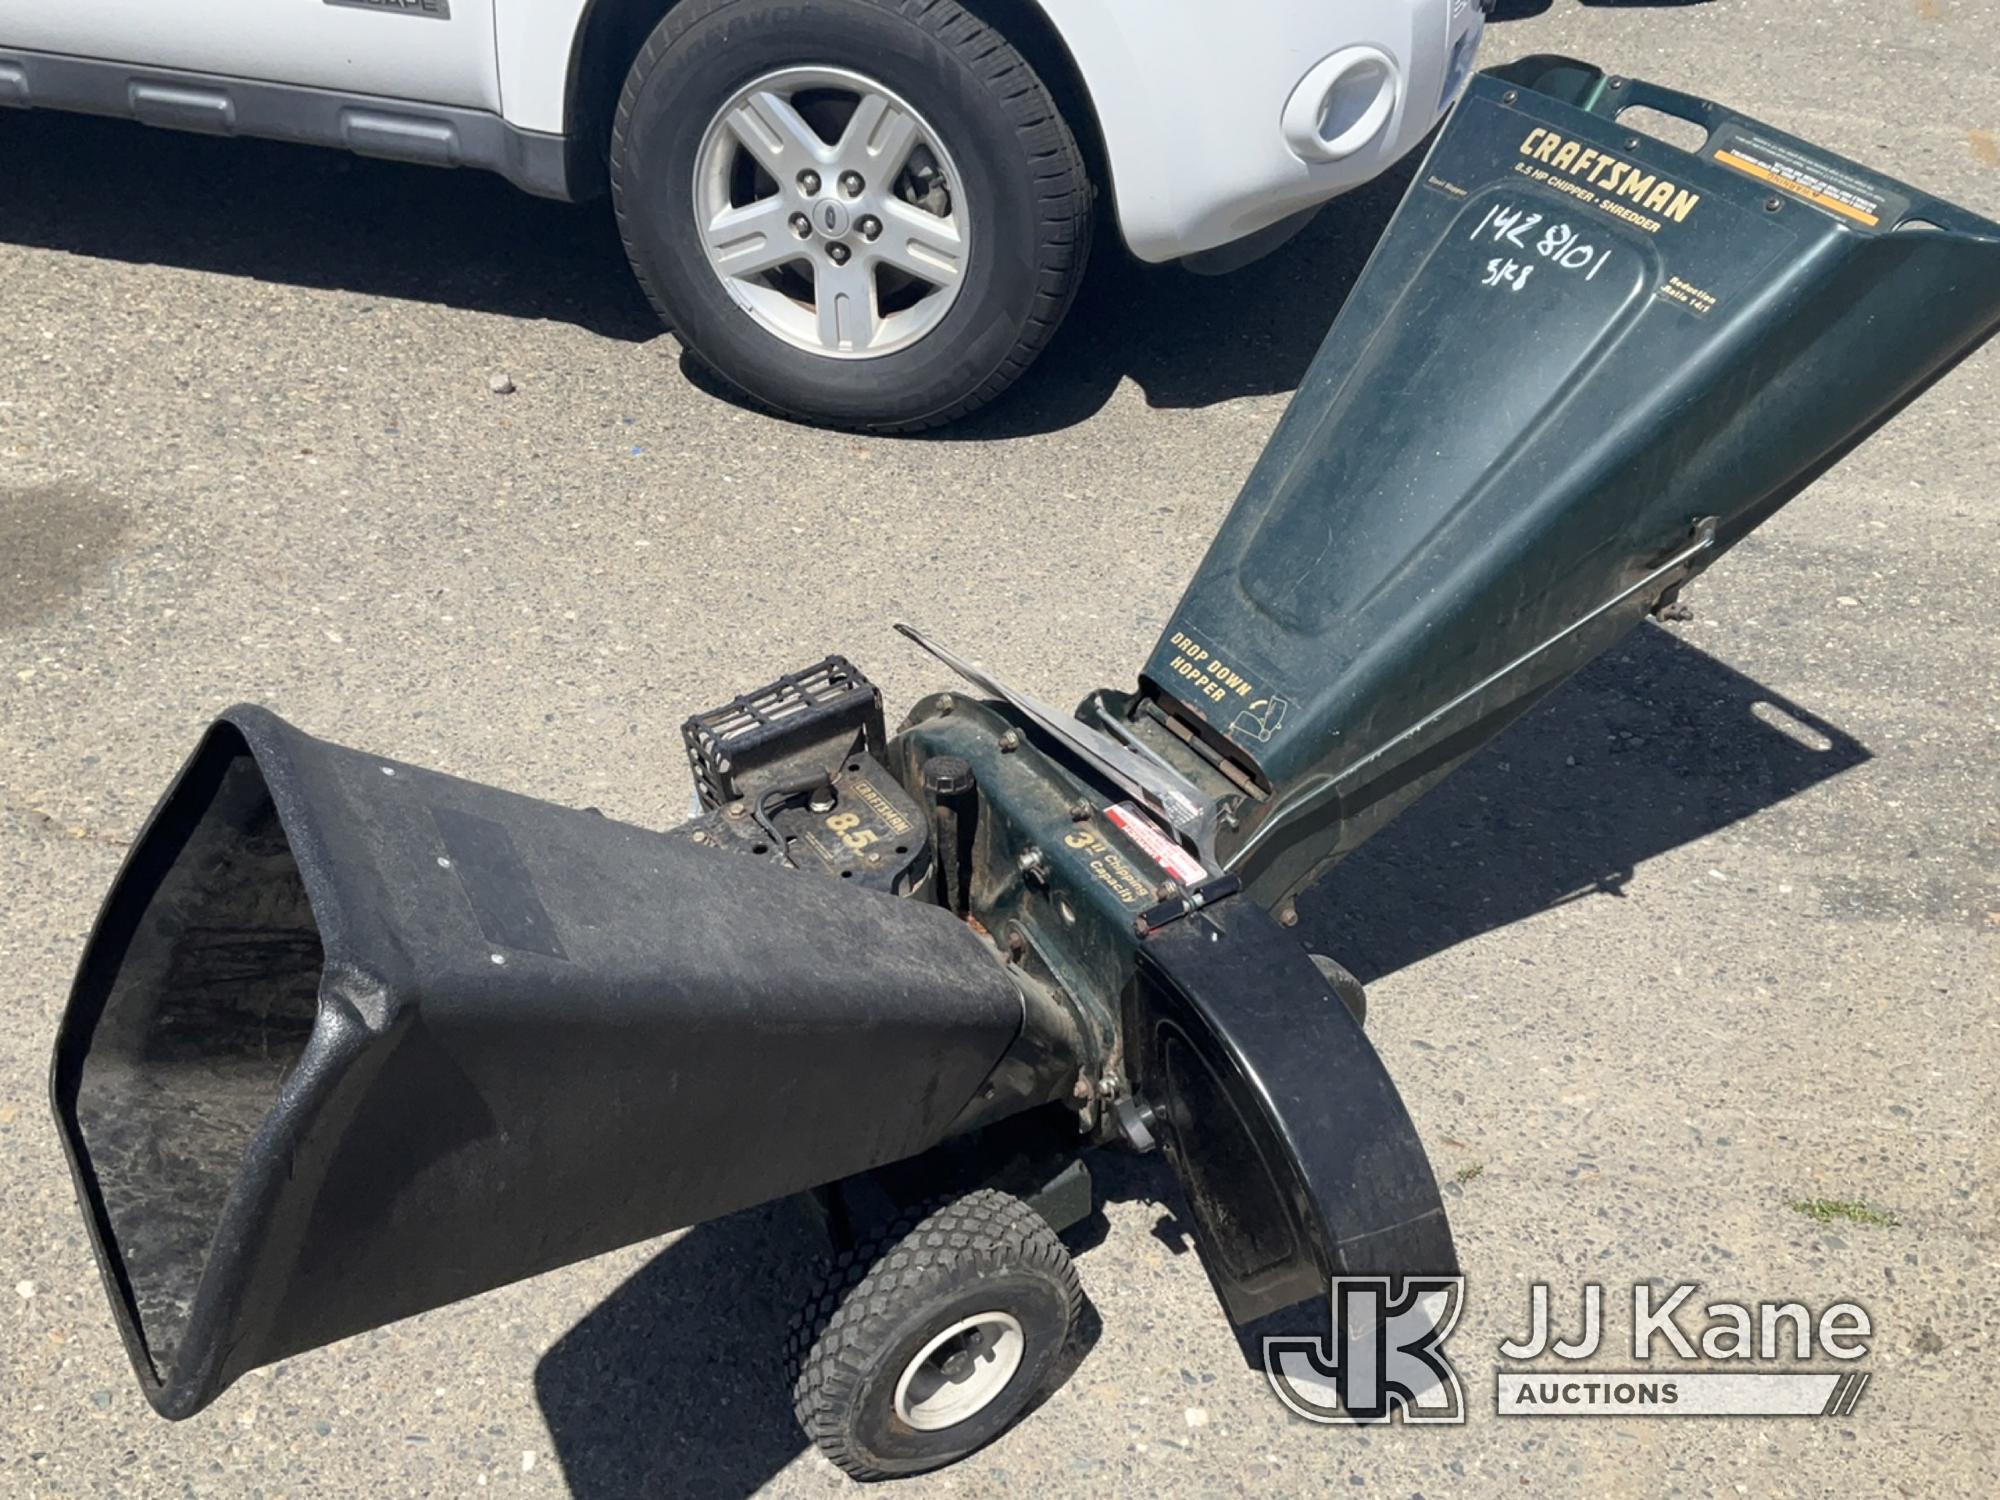 (Dixon, CA) Craftsman 8.5 HP Chipper/Shredder (Runs & Operates) NOTE: This unit is being sold AS IS/